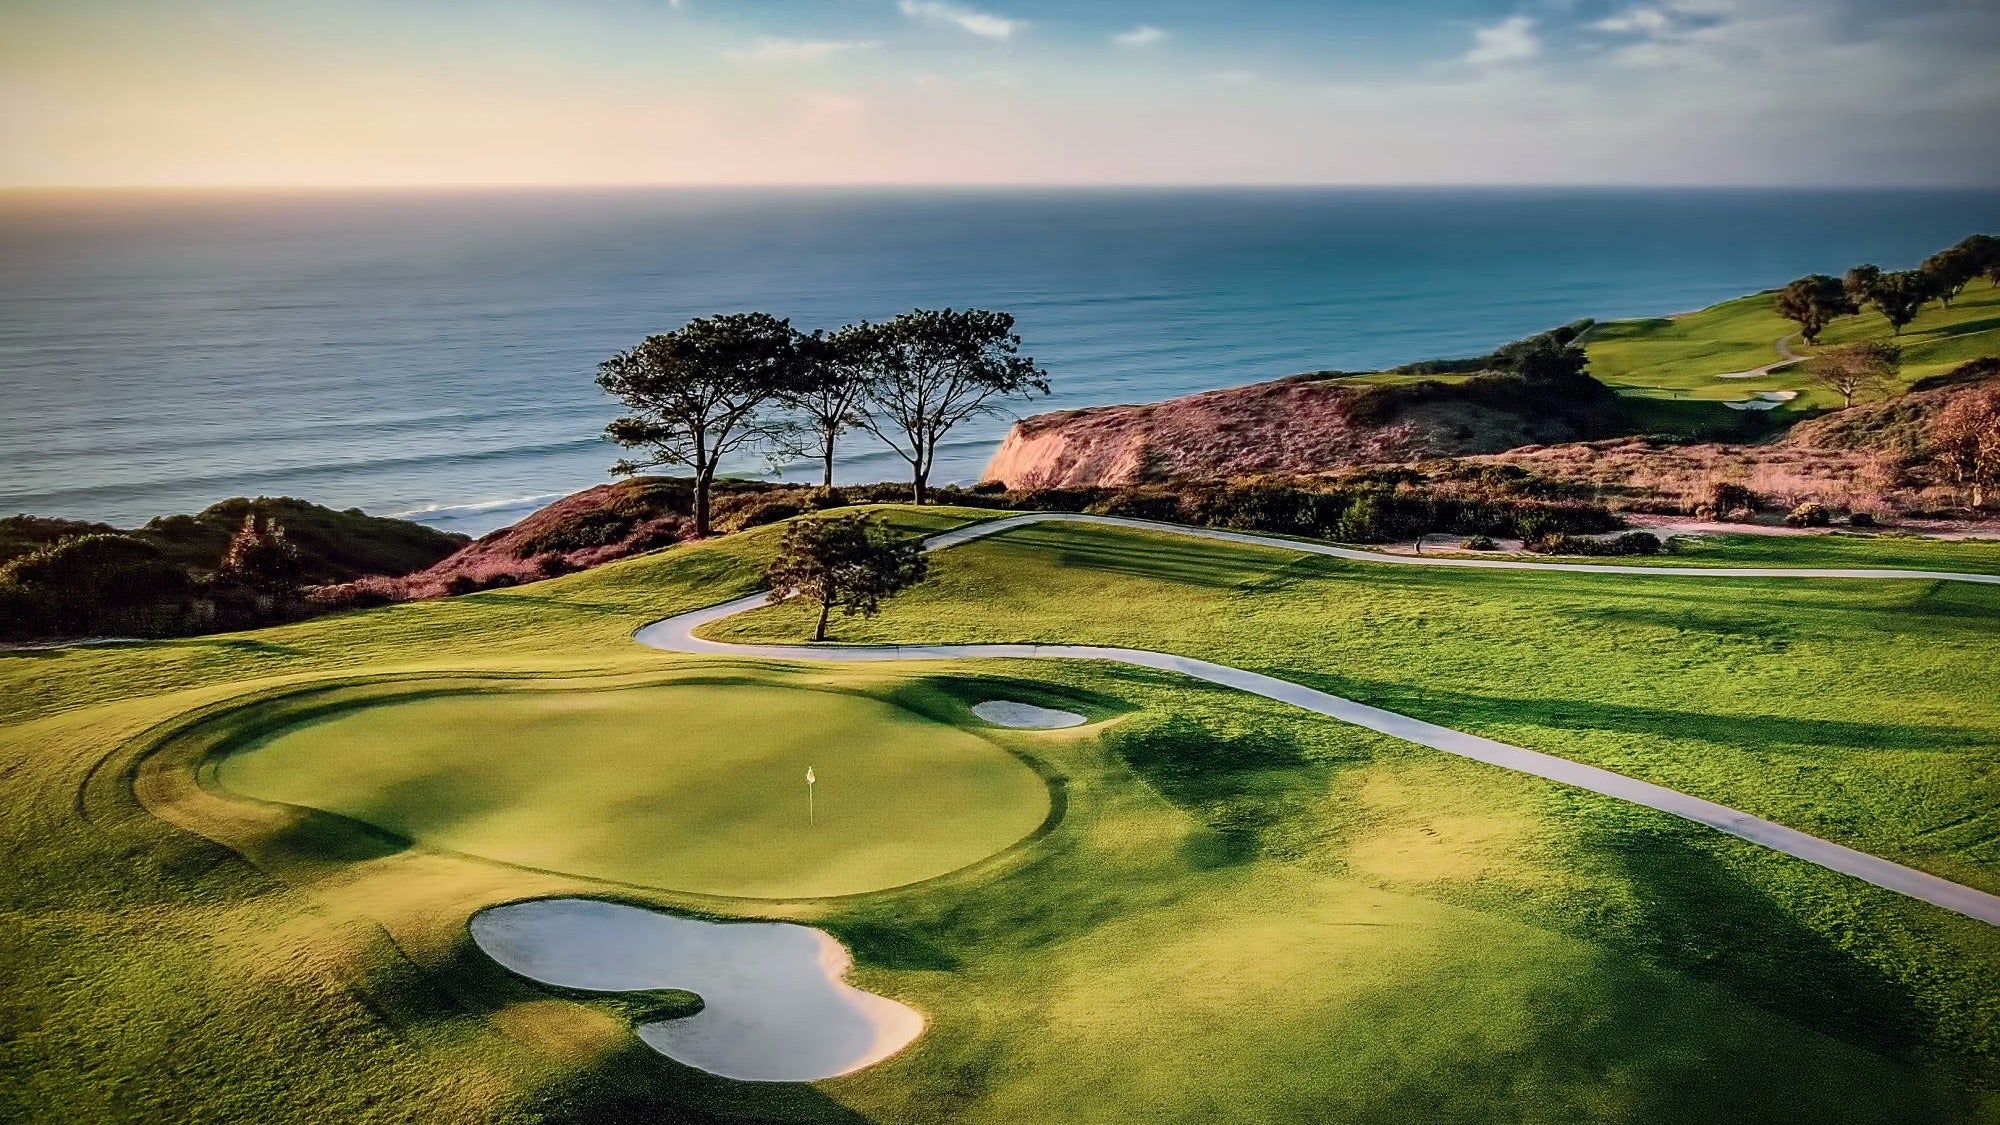 Torrey Pines | golf course situated atop cliffs towering above the Pacific Ocean in San Diego, California.